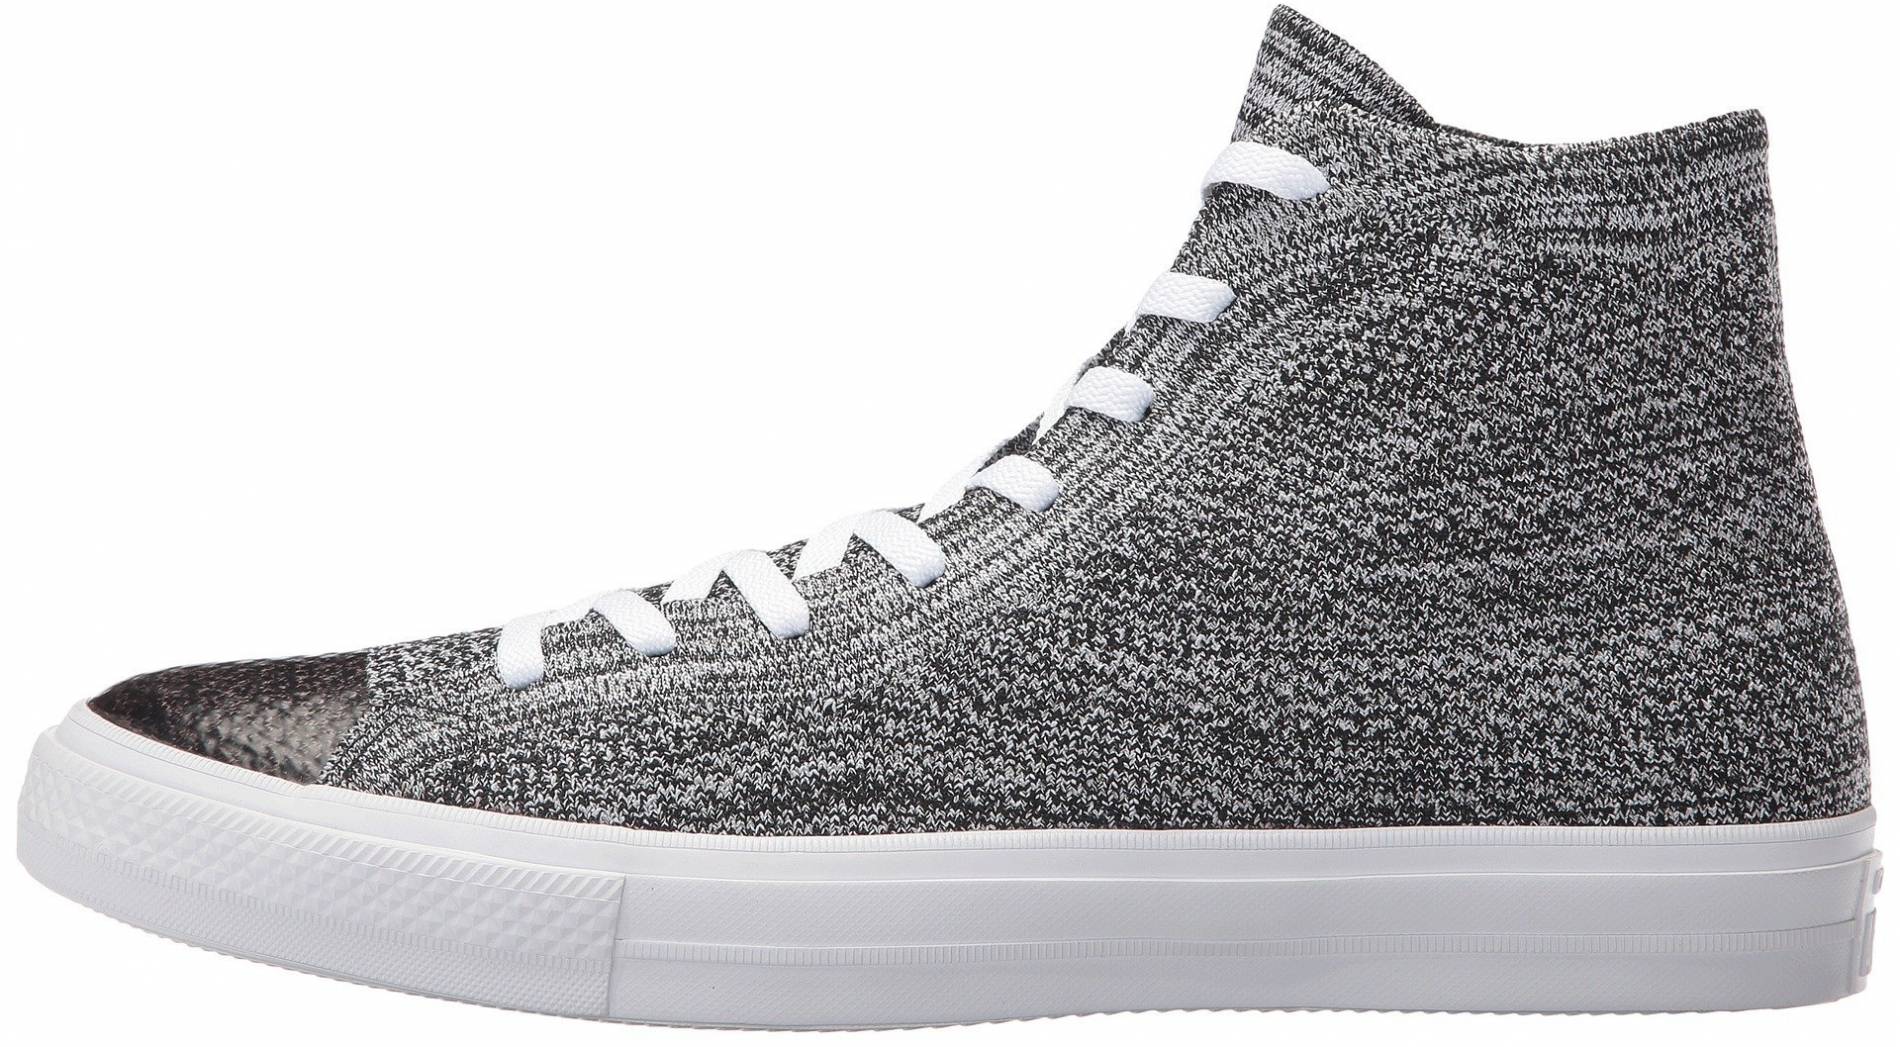 Converse Chuck Taylor All Star x Nike Flyknit High Top sneakers in black  (only $90) | RunRepeat